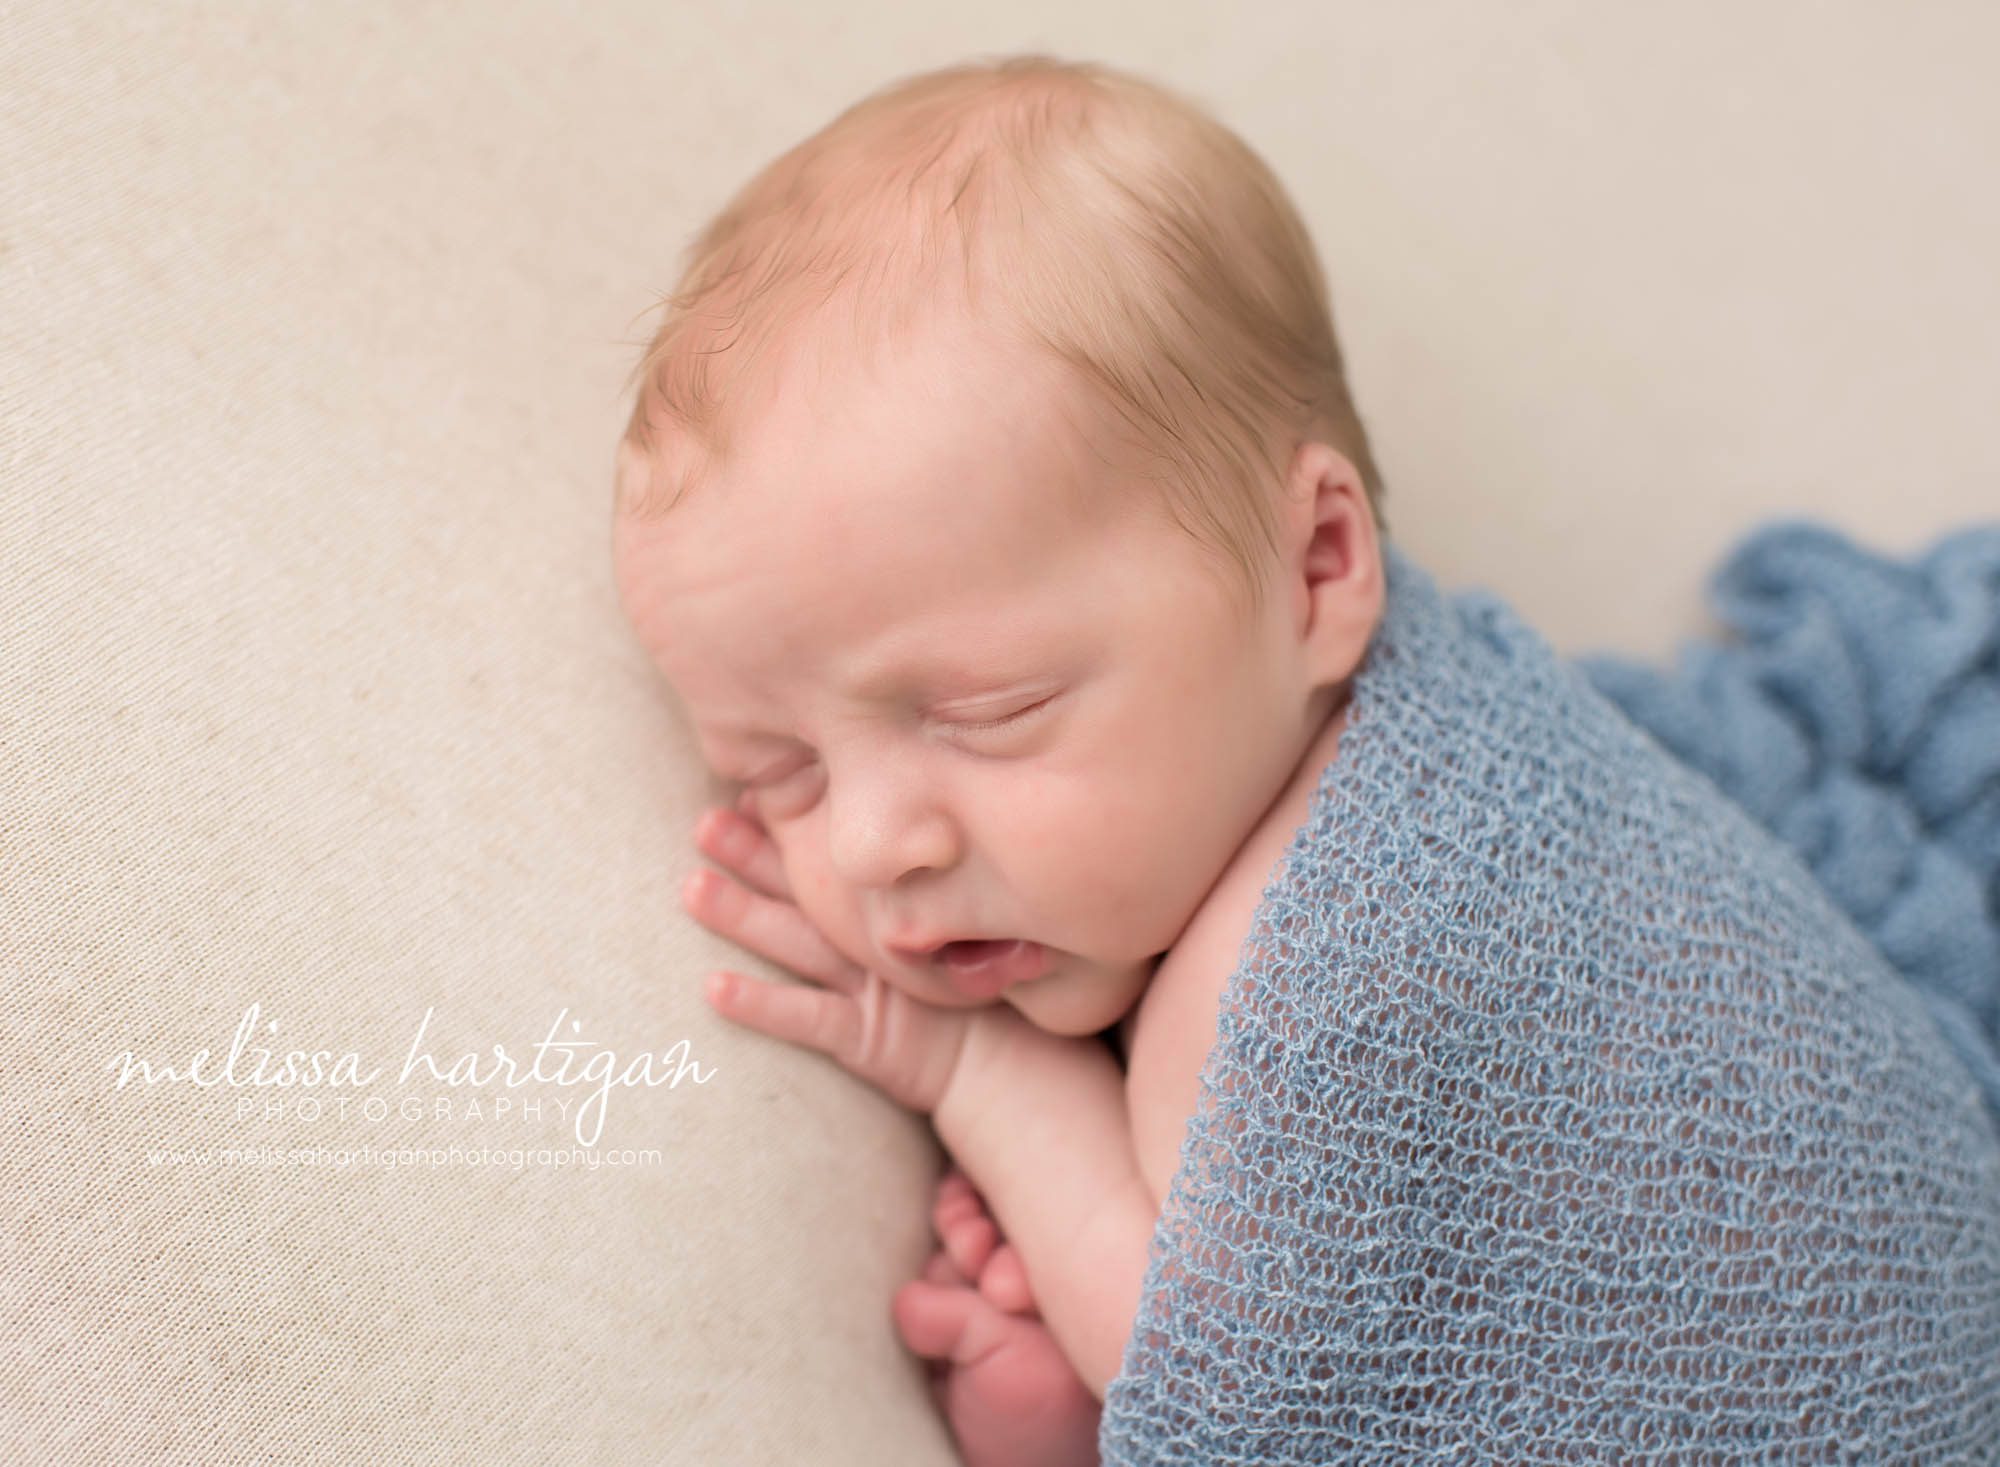 Melissa Hartigan Photography Connecticut Newborn Twin Photographer Coventry Ct Middlefield CT baby Fairfield county Newborn and maternity CT photographer Newborn twin photographer baby boy sleeping with blue wrap head on hands